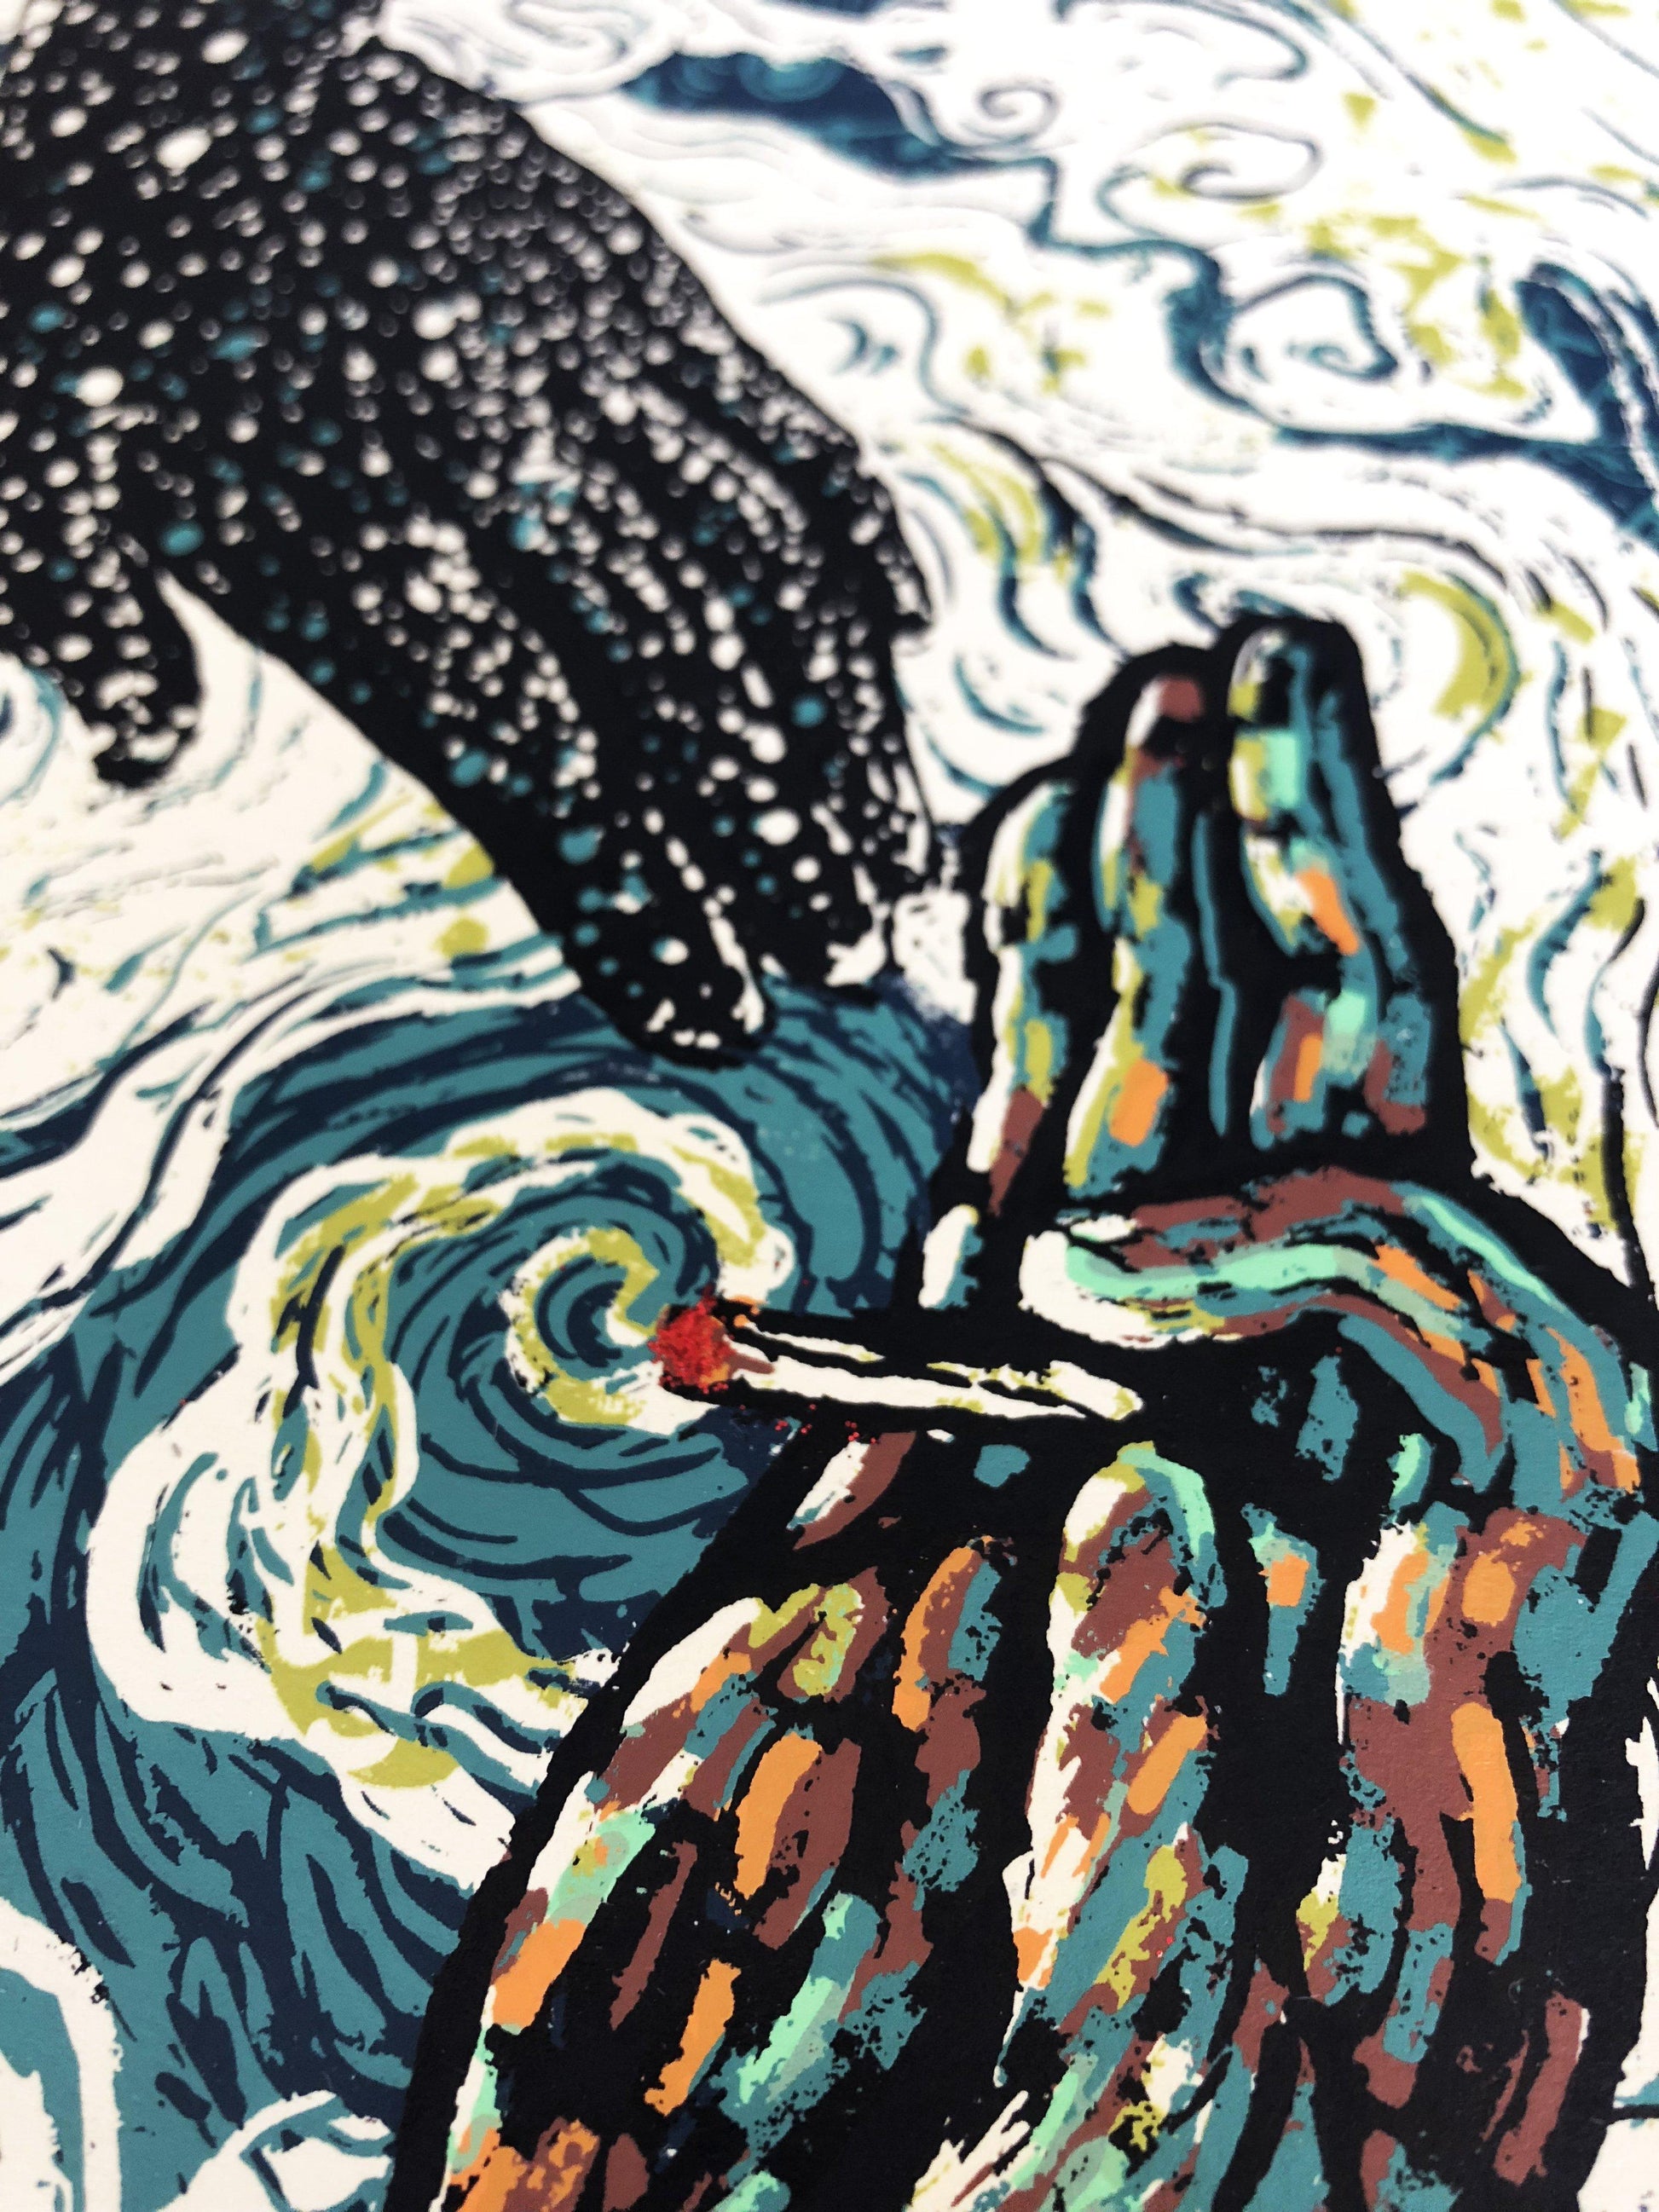 Pass That (Limited Edition of 200) James R. Eads